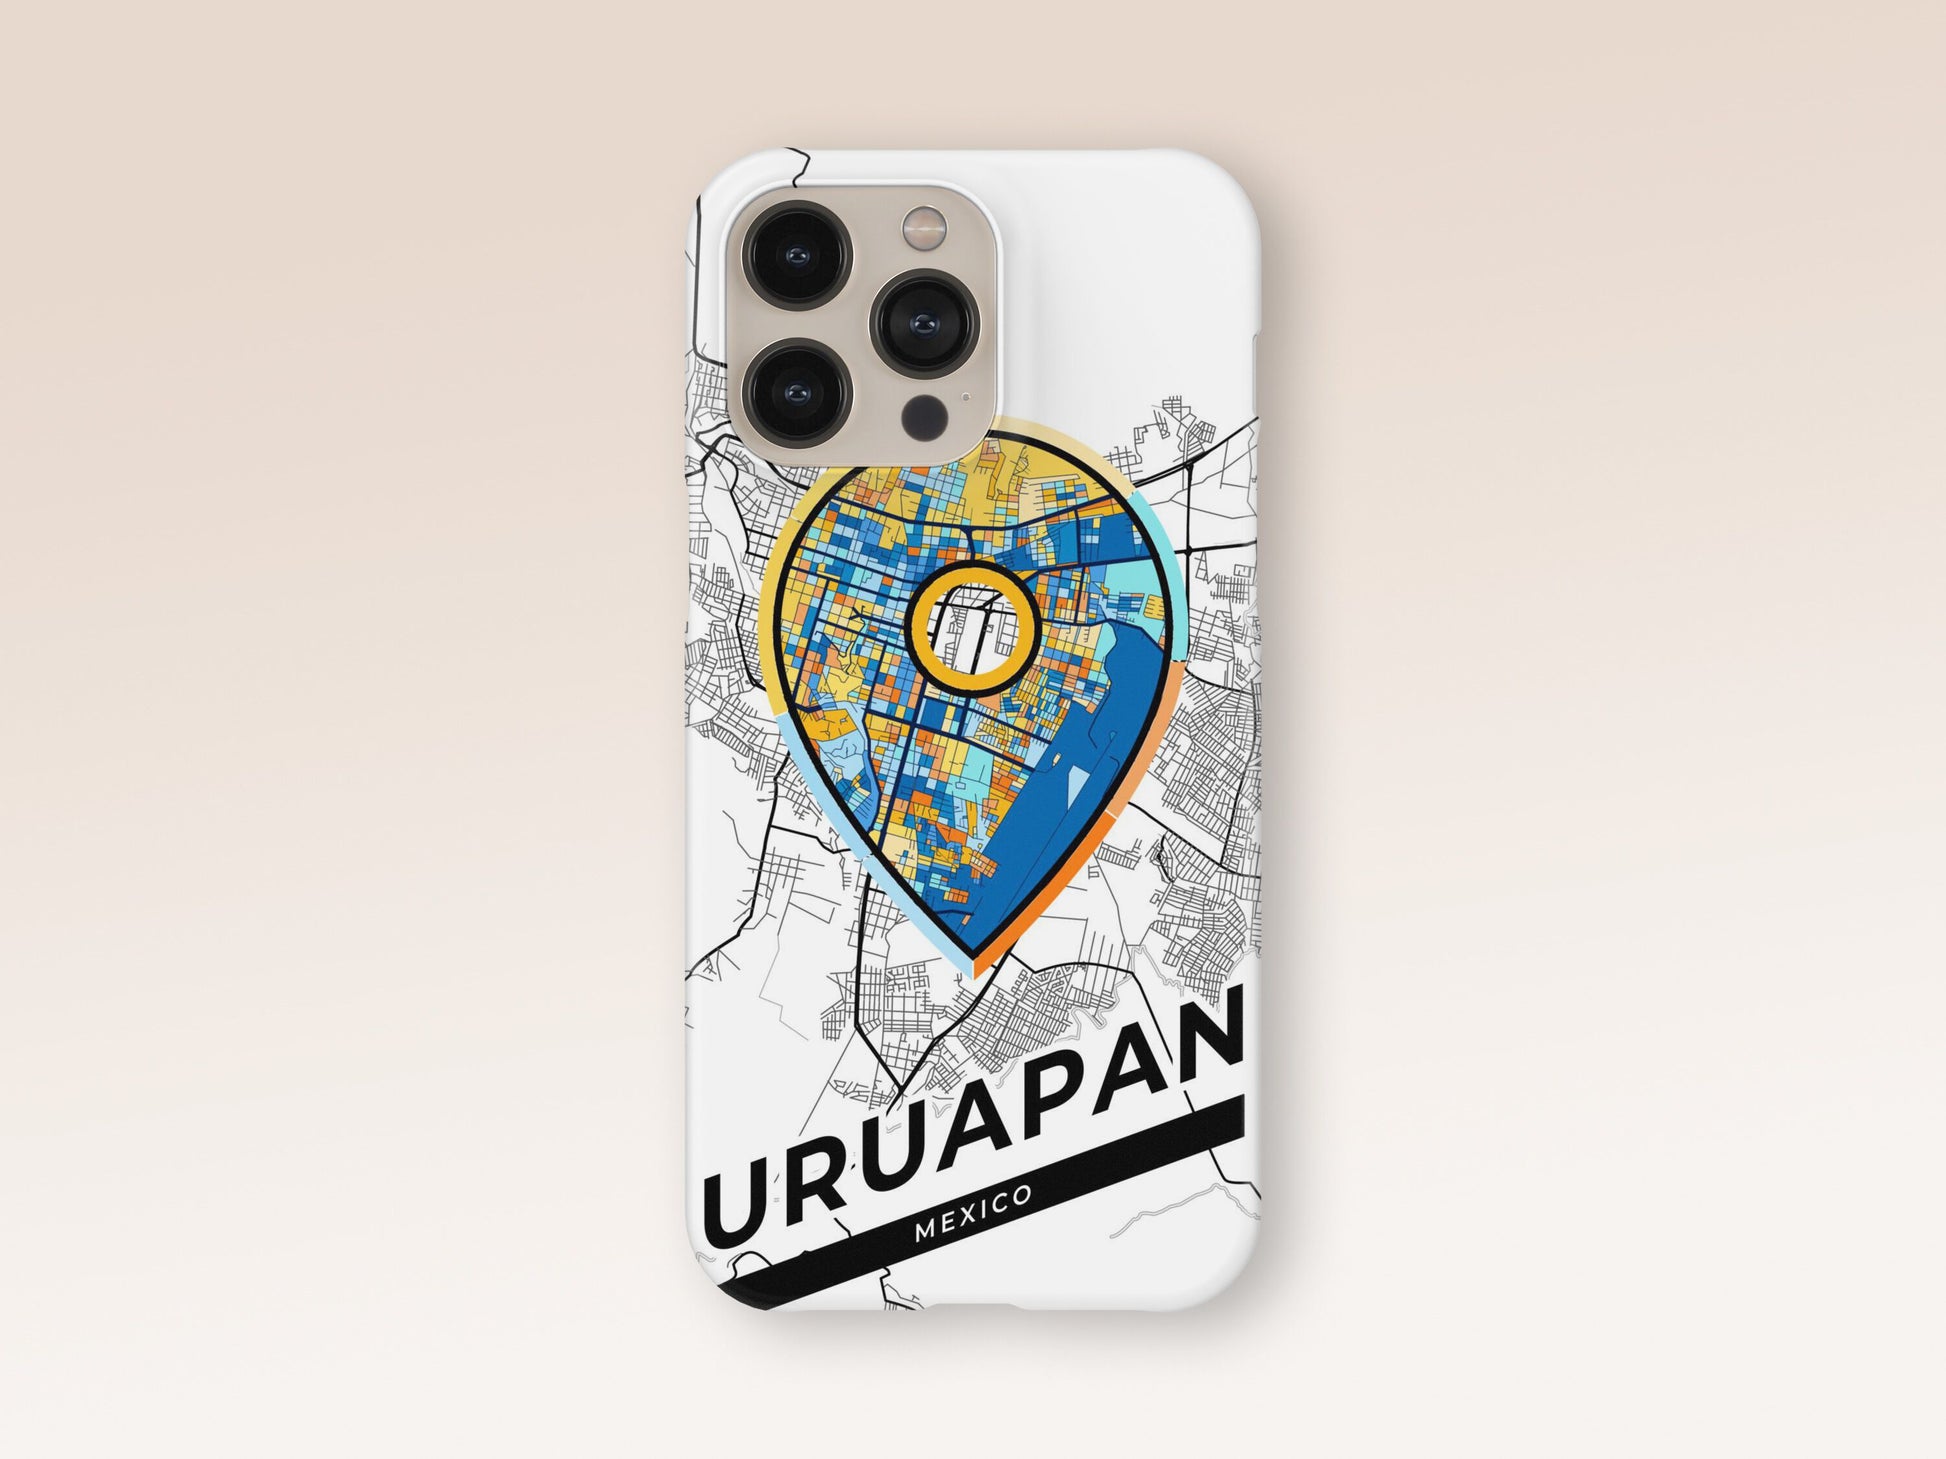 Uruapan Mexico slim phone case with colorful icon 1